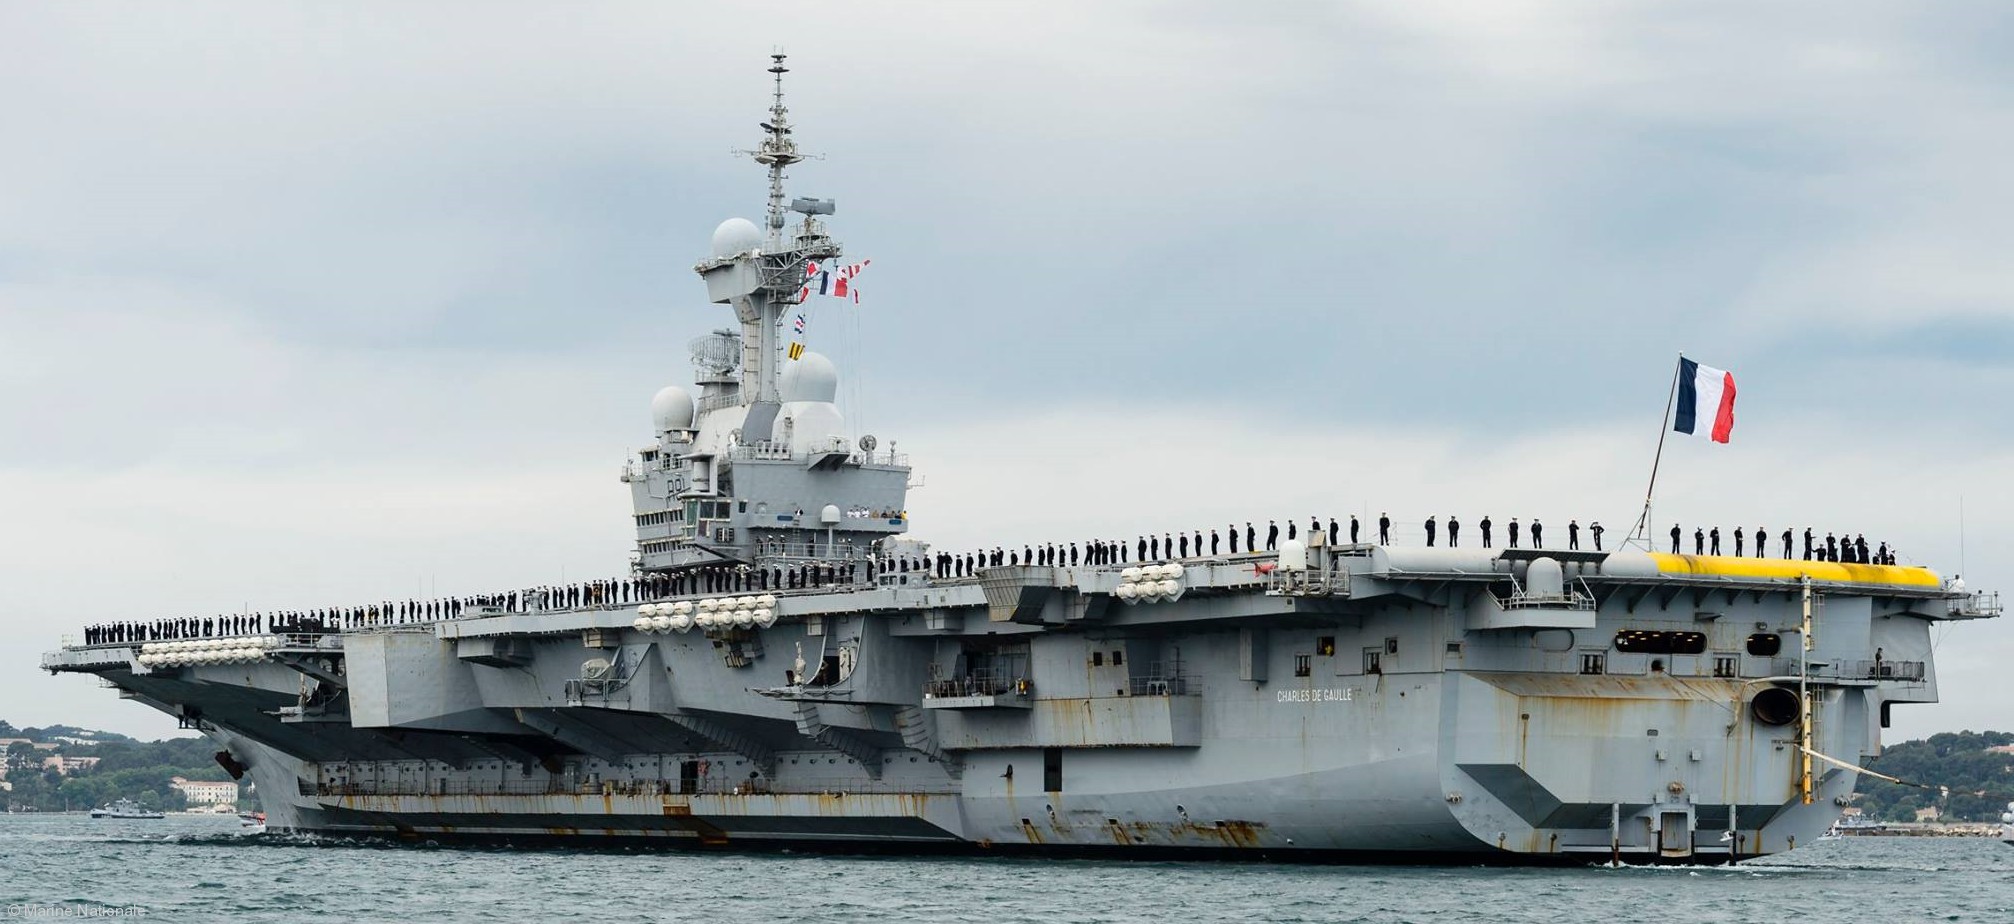  r-91 fs charles de gaulle aircraft carrier french navy 34 homeport toulon